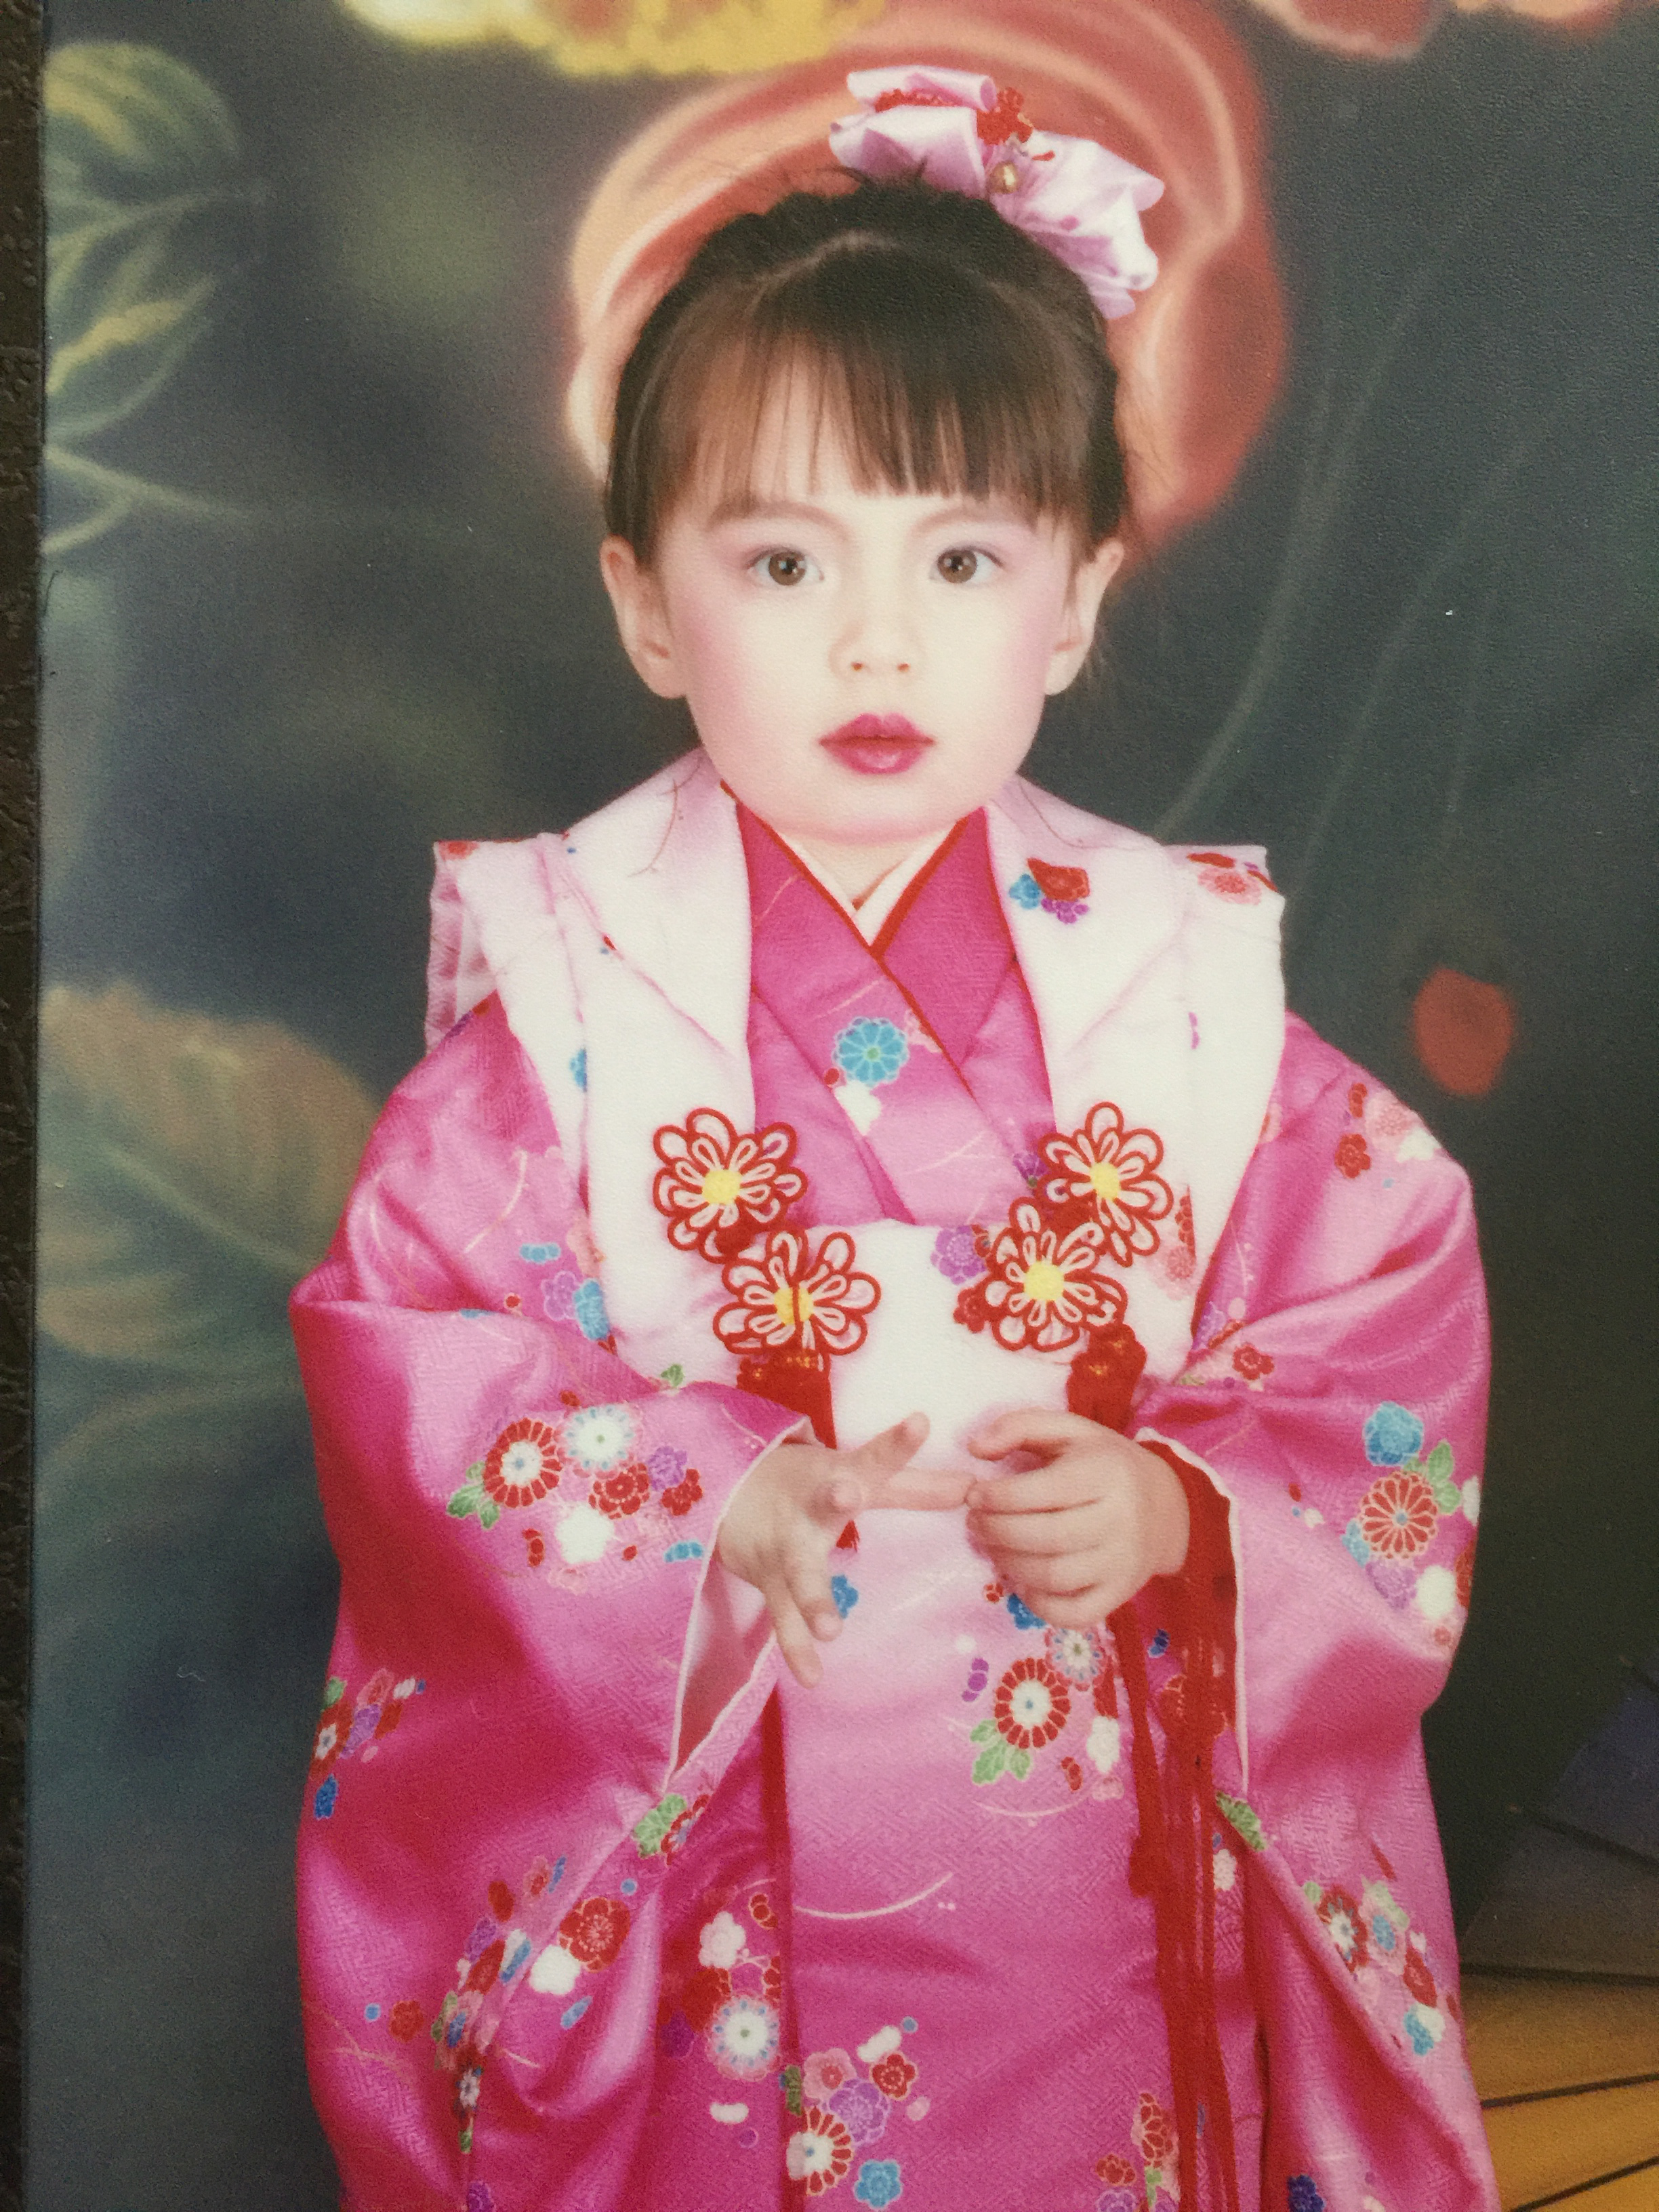 A family photo of Jaguar Jonze as a kid. Pictured: a young Taiwanese girl dressed in a traditional pink kimono.